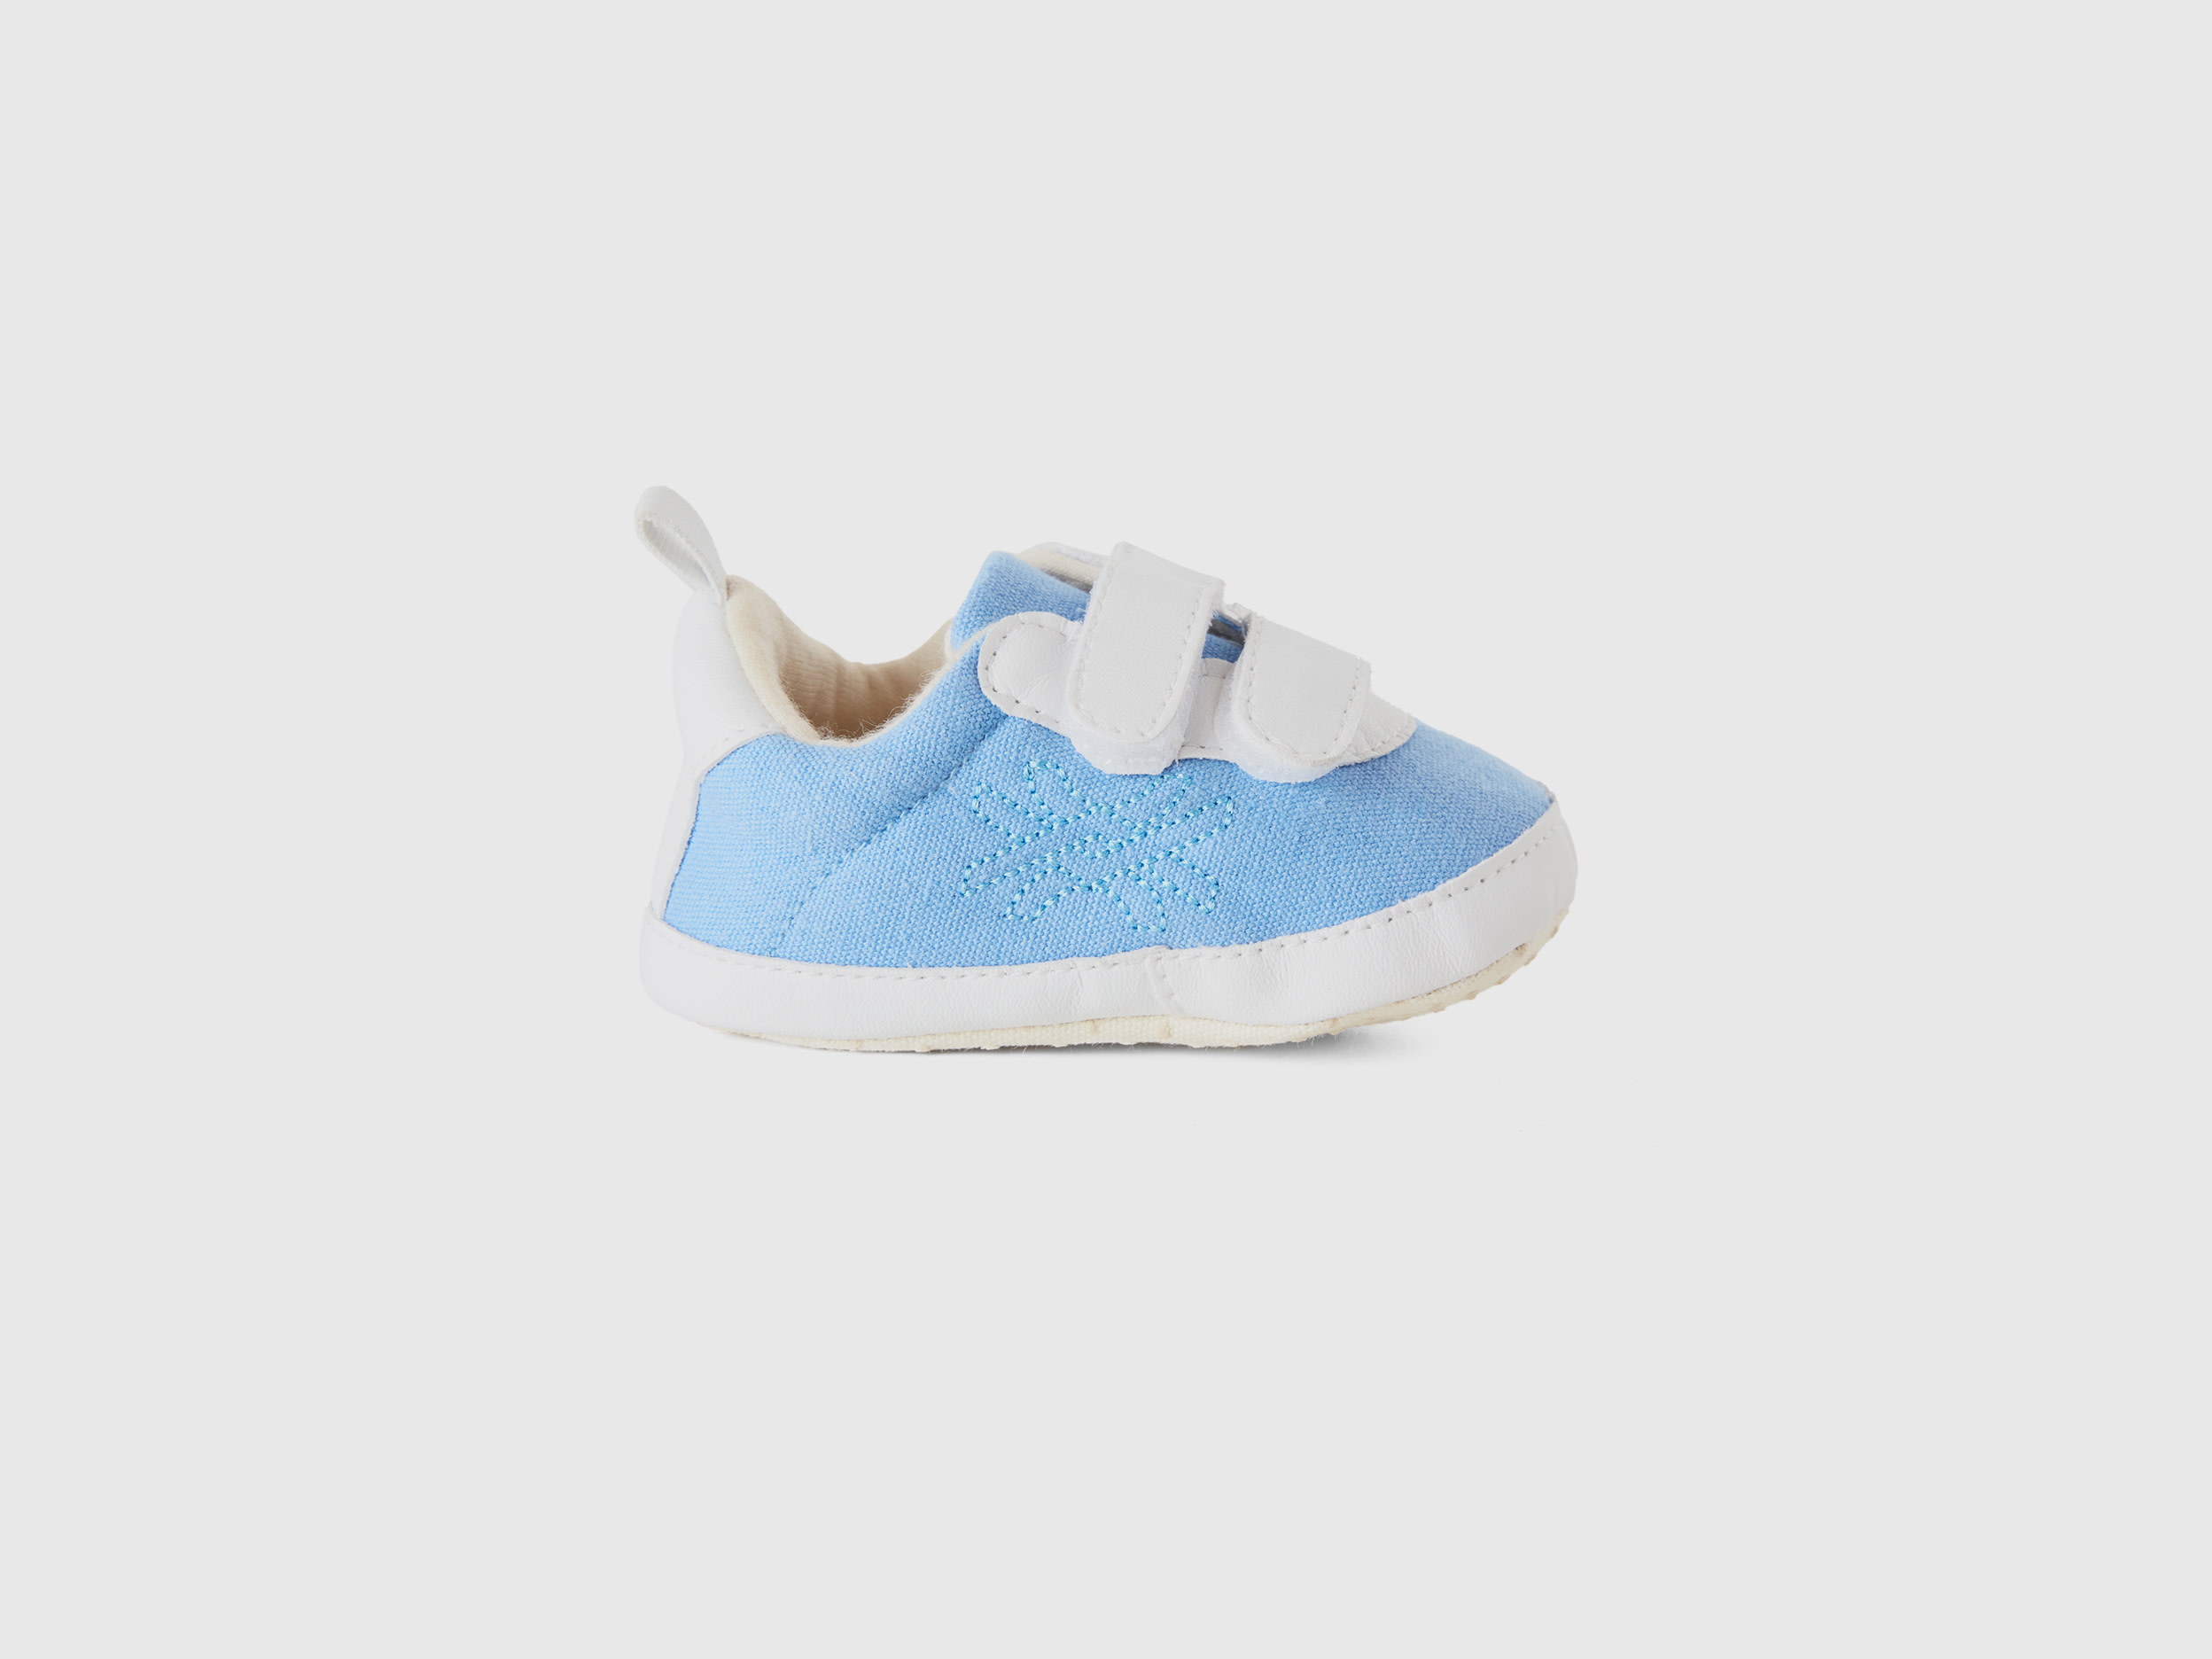 Benetton, First Steps Shoes In Canvas, size 2C, Sky Blue, Kids